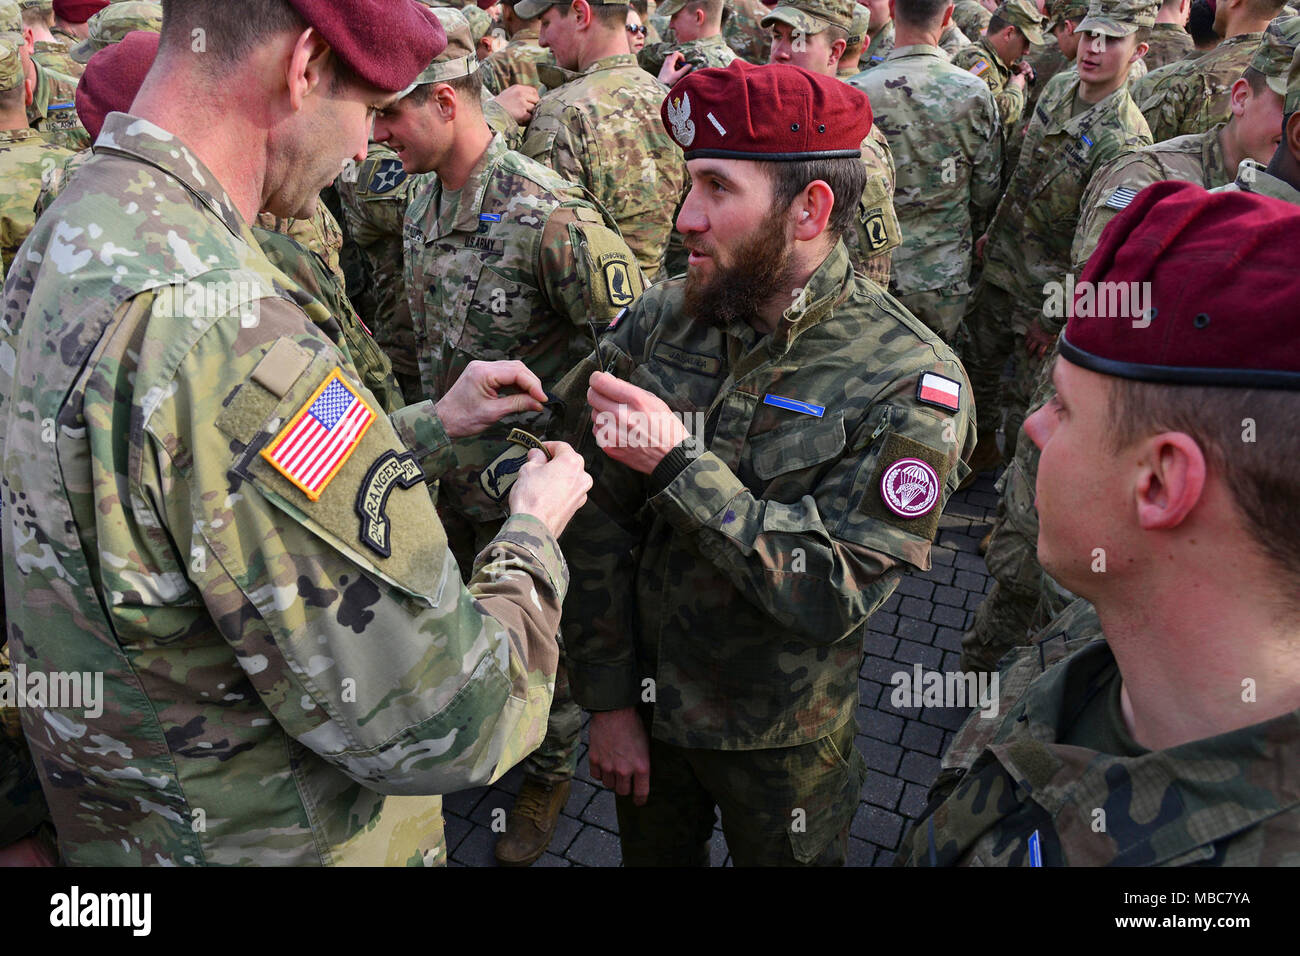 Col. James B. Bartholomees III, Commander of the 173rd Airborne Brigade (left) , puts the 173rd Airborne Brigade shoulder sleeve insignia on a Poland Army Soldier during the Expert Infantryman Badge (EIB) ceremony at Caserma Del Din, Vicenza, Italy, 15 Feb. 2018. (U.S. Army Stock Photo